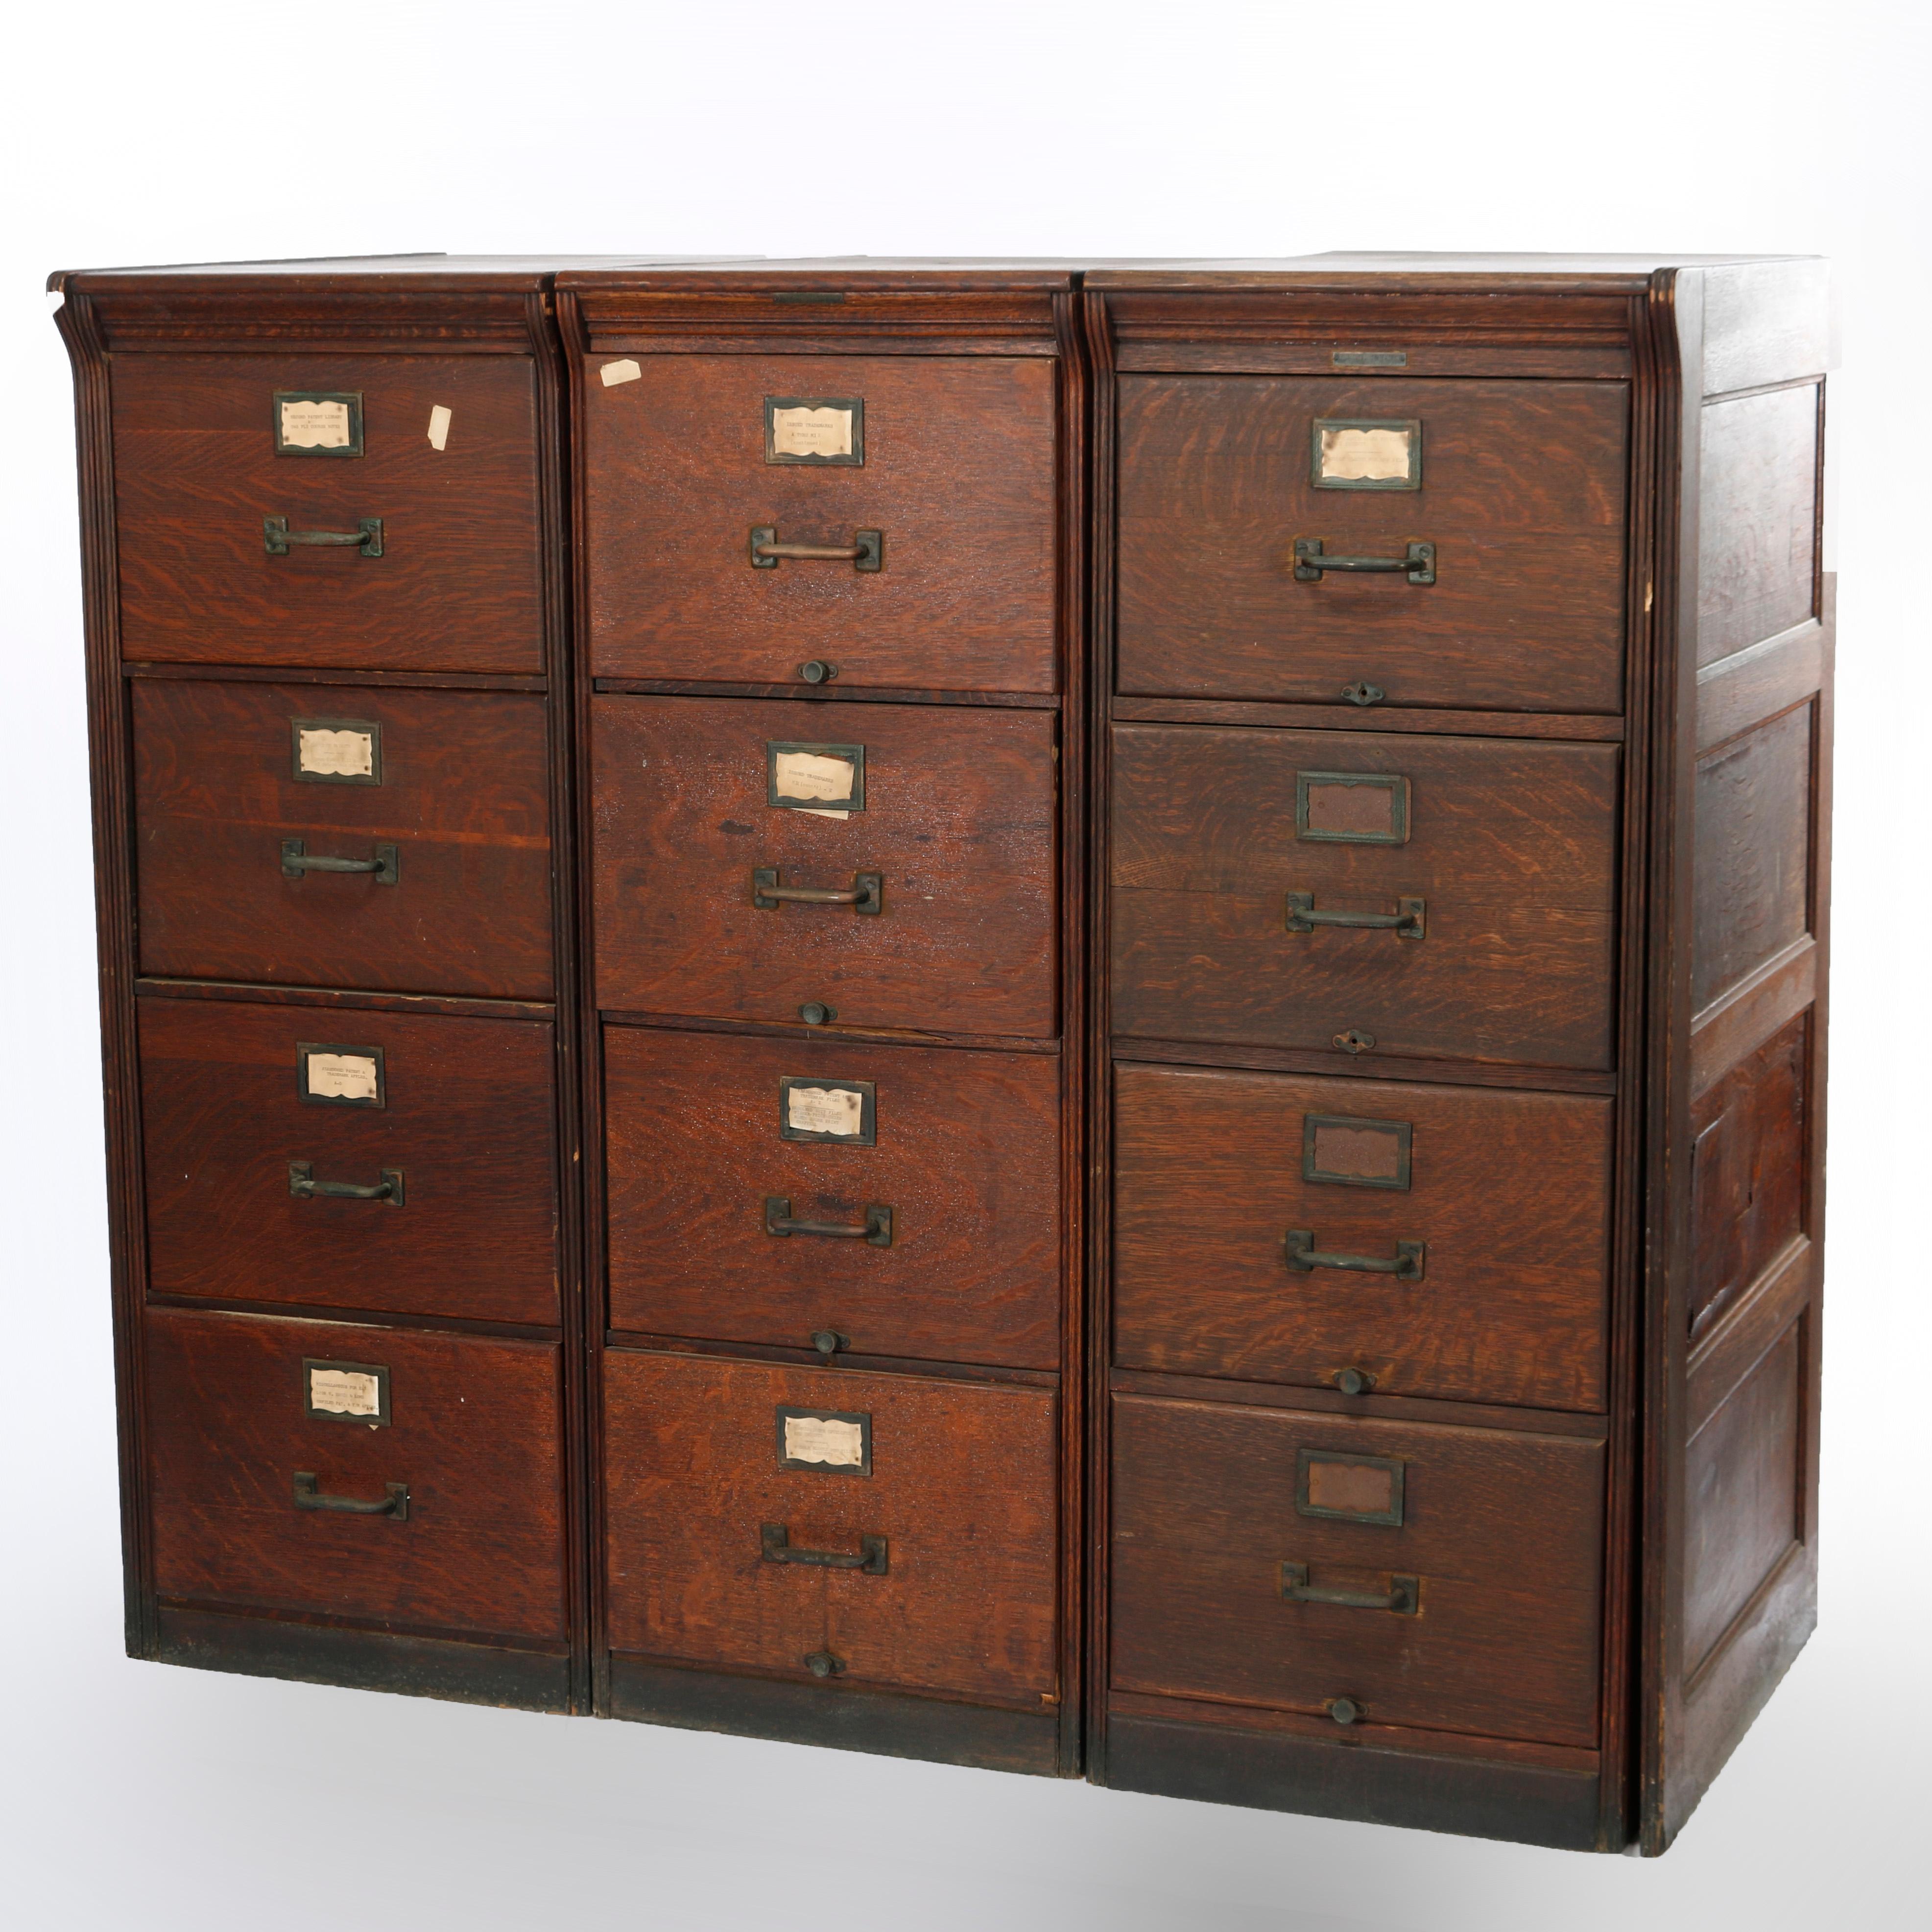 An antique triple filing cabinet by Yawman and Erbe offers quarter sawn oak construction with three sections (two legal and one standard), each having three drawers, maker label as photographed, c1910

Measures - 53''H x 59.5''W x